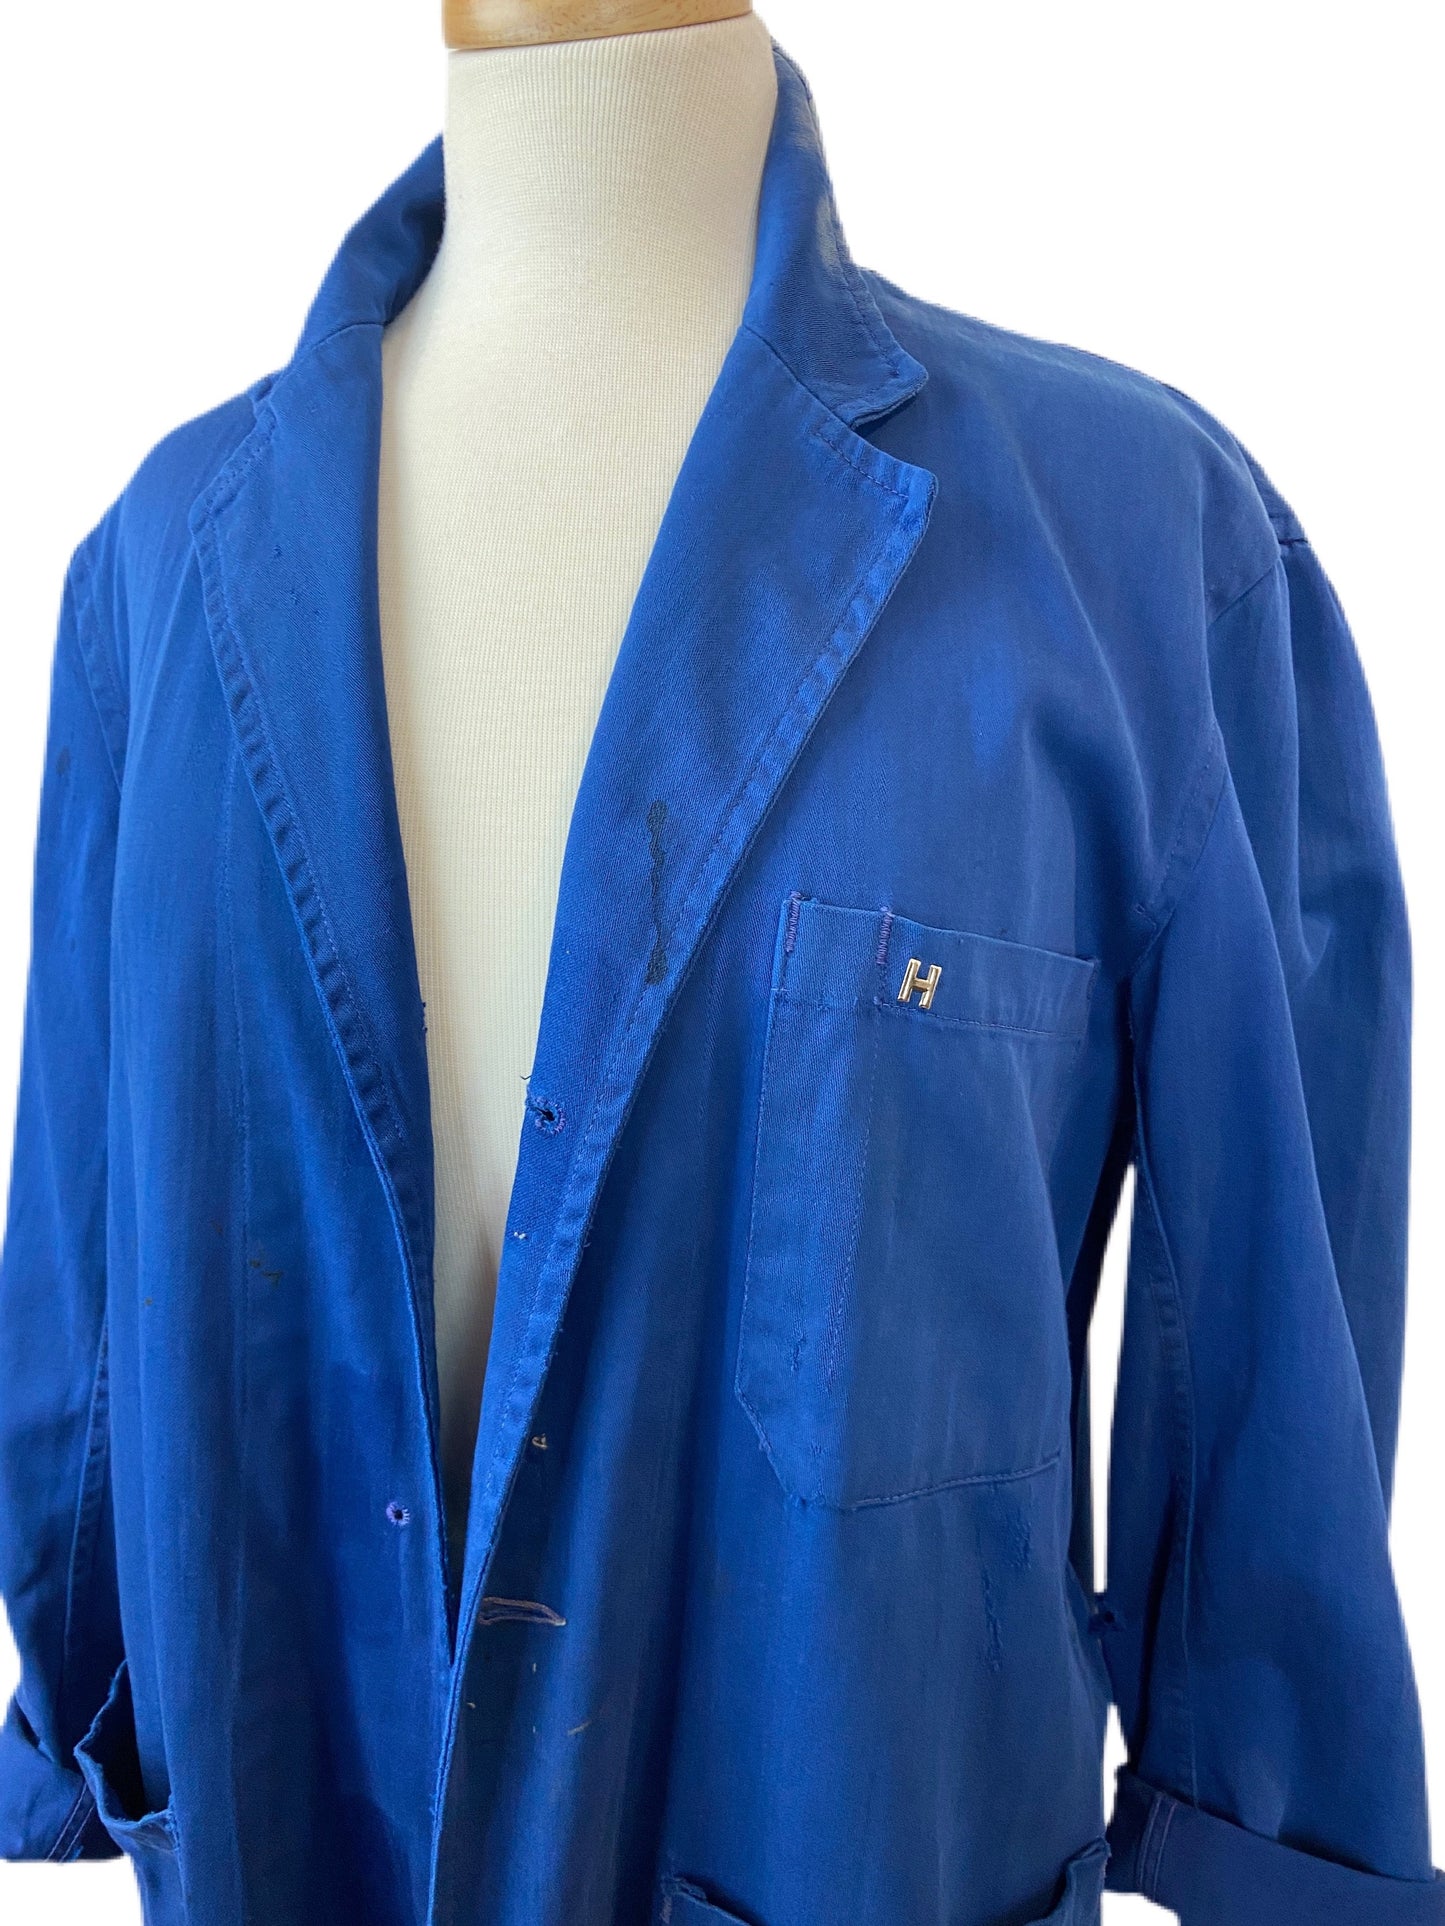 Vintage Workwear 1965 Frontenac Coverall LTD Smock Blue Cotton Distressed Workwear Coat (38)